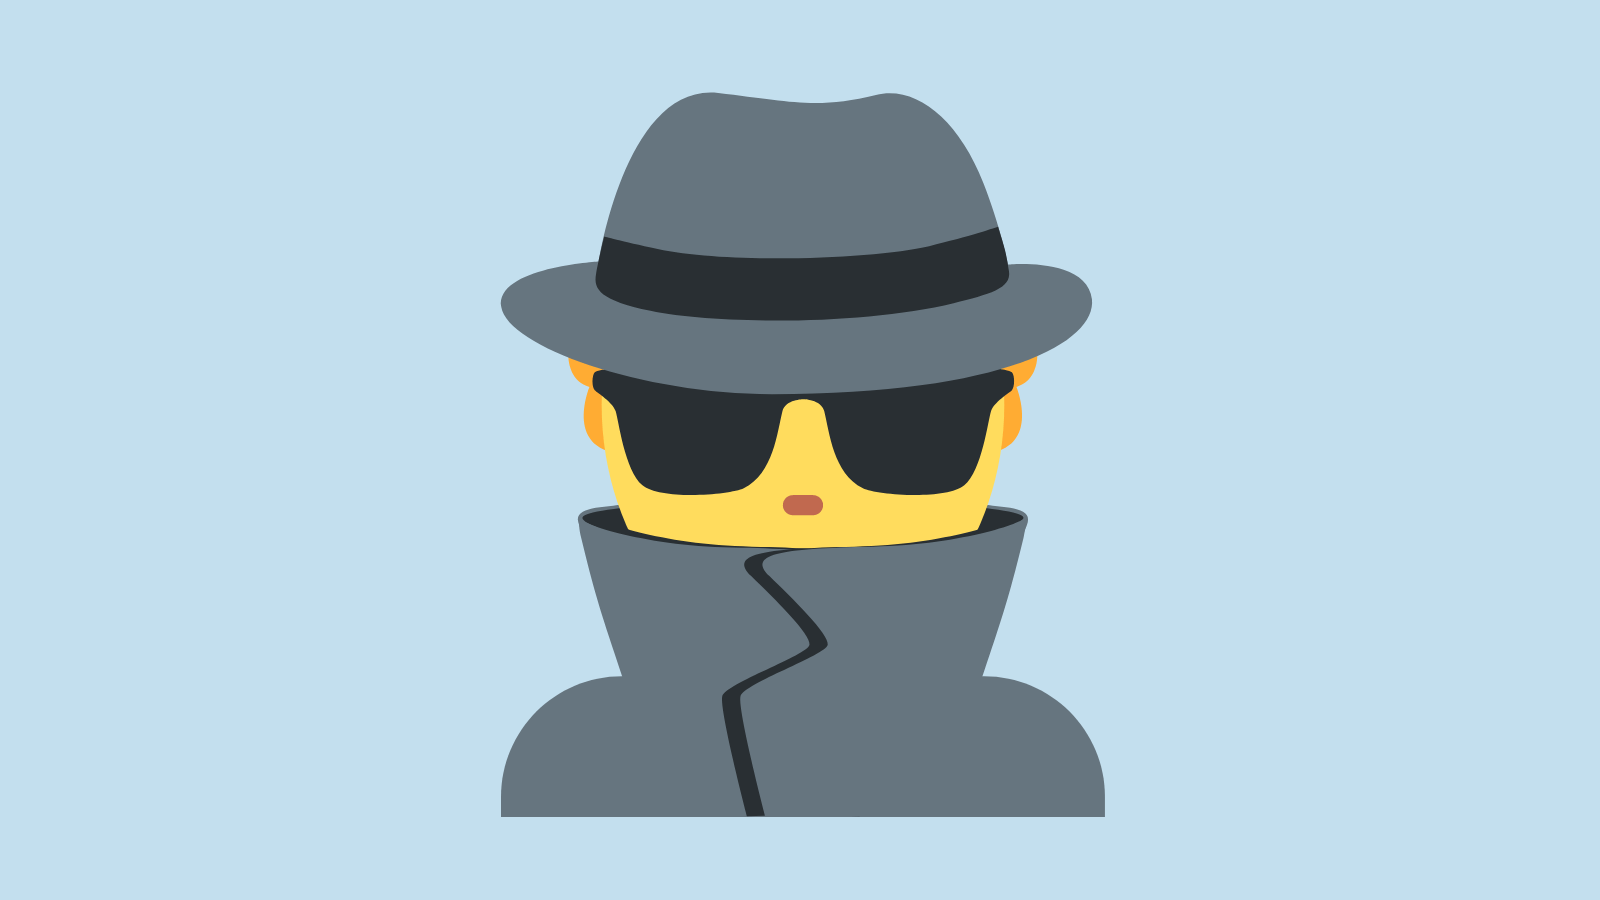 The spy emoji, a person wearing a grey coat and hat and sunglasses